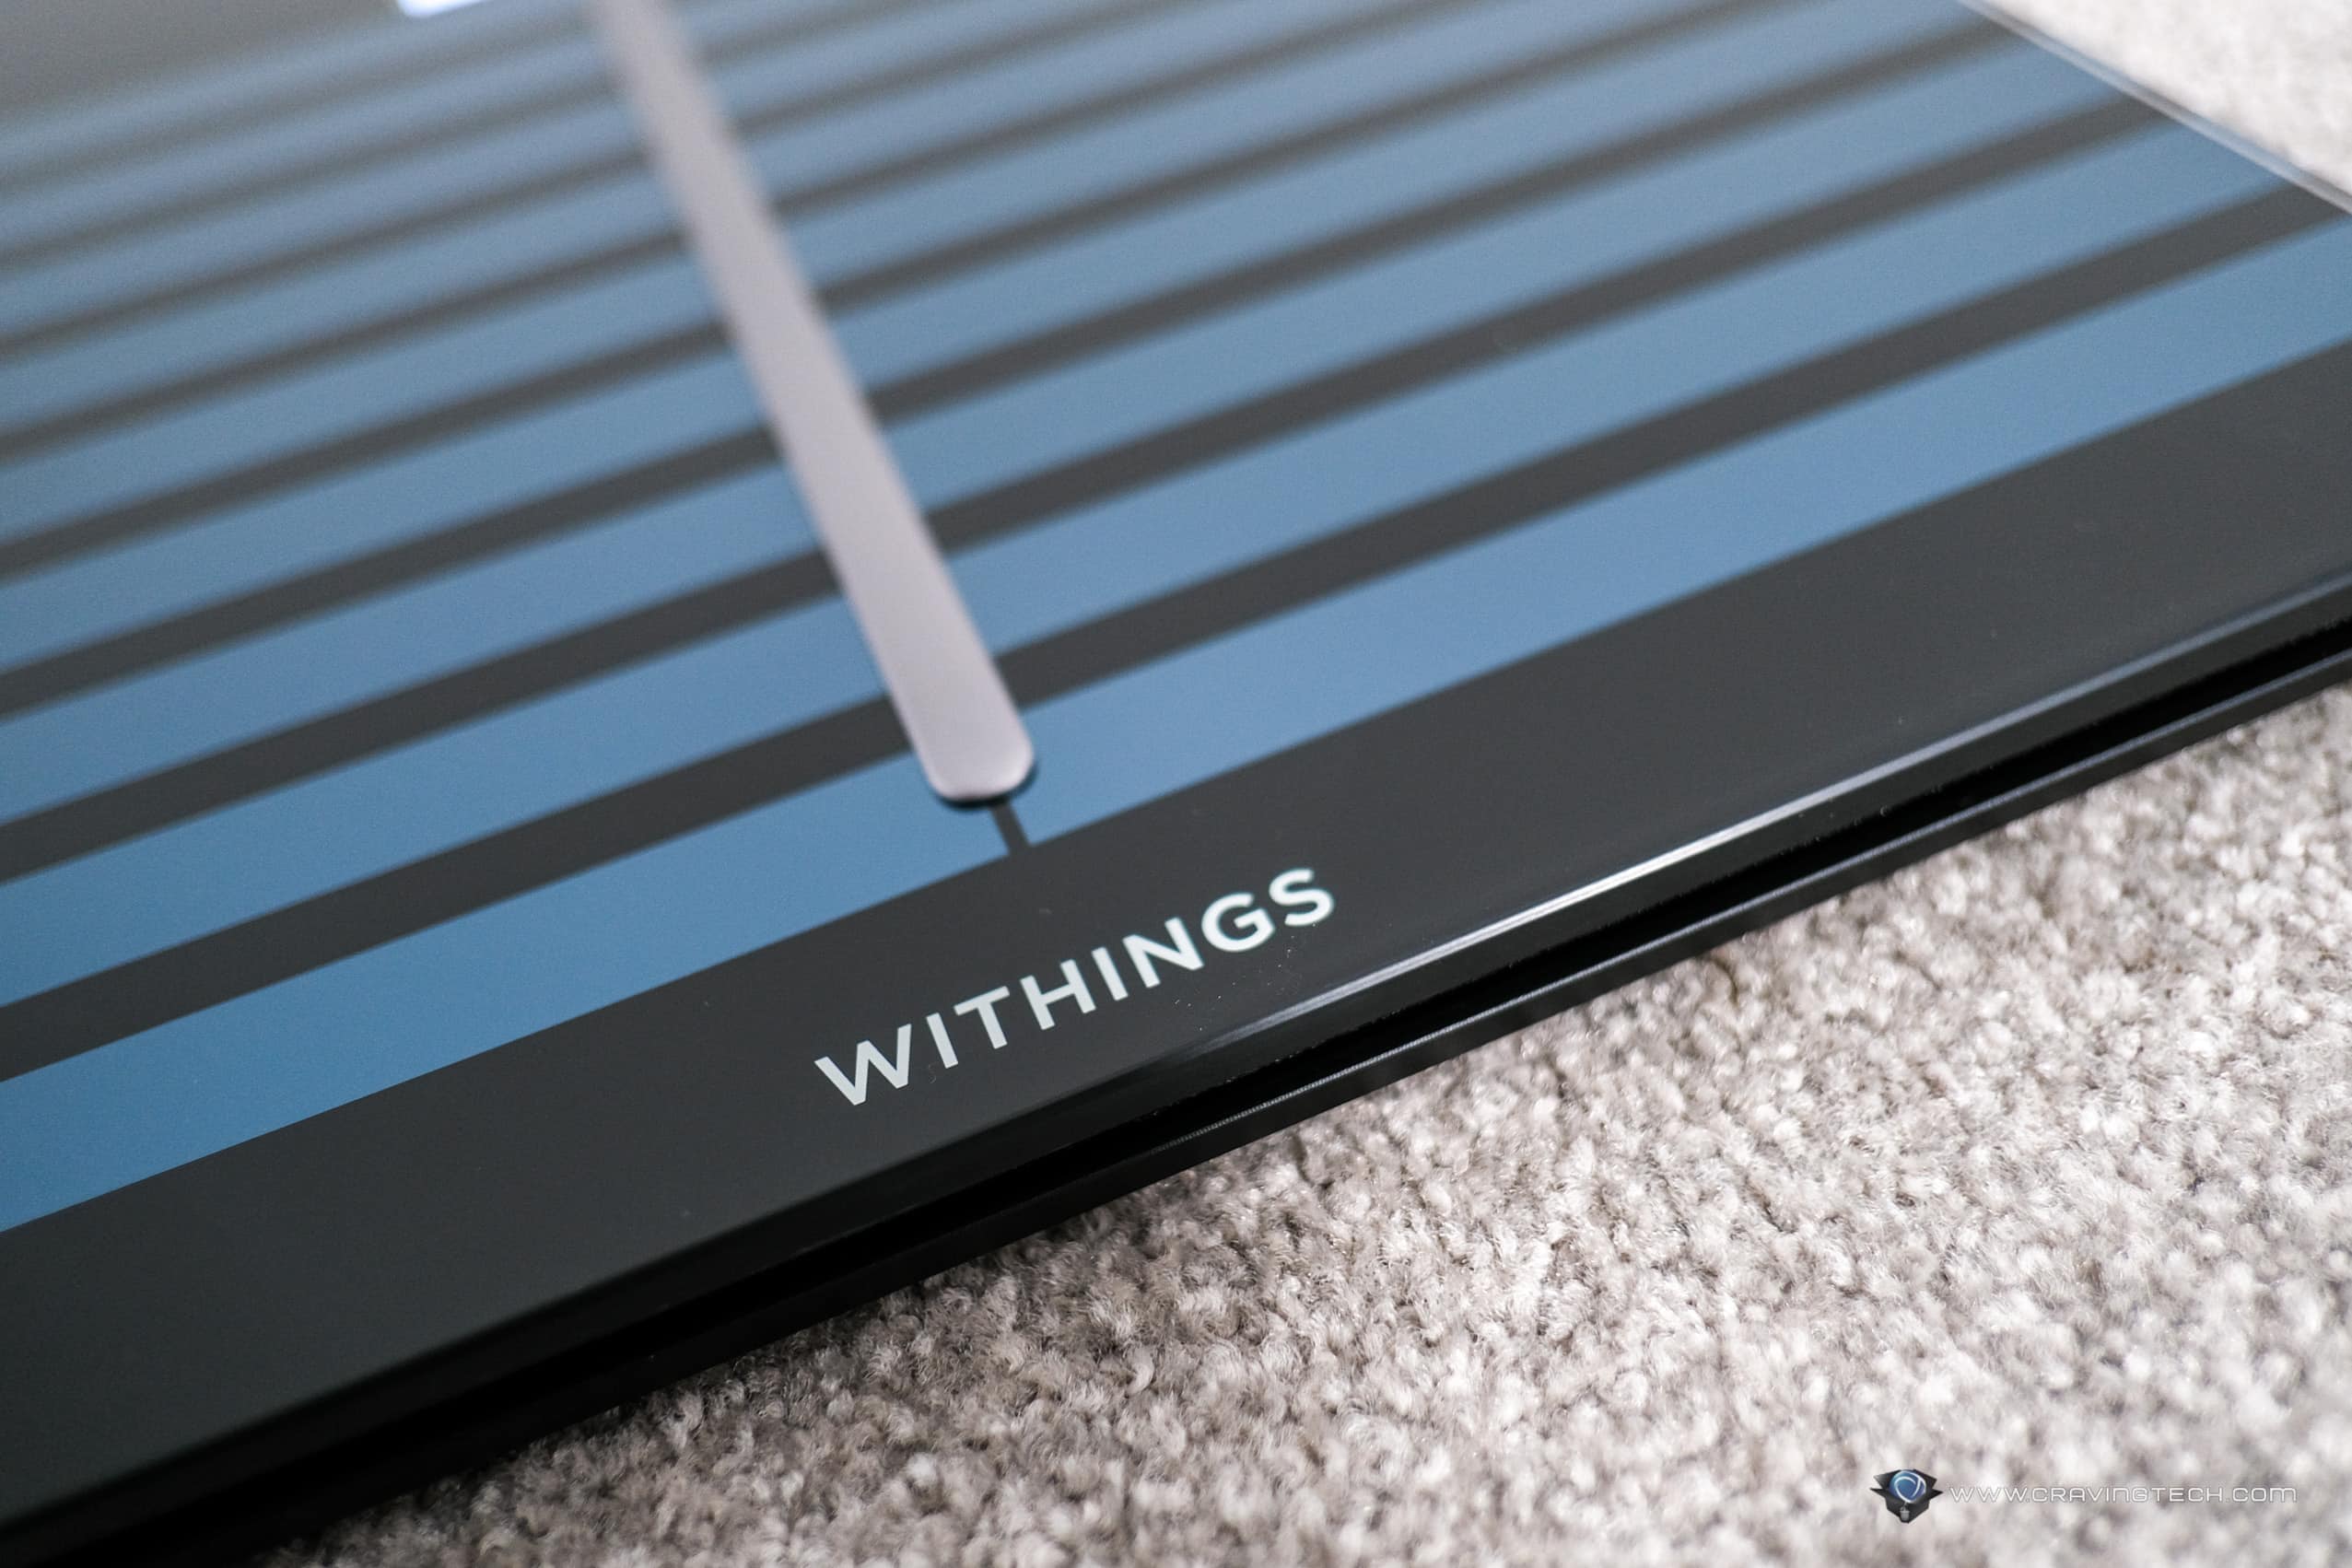 Withings Body Cardio Review